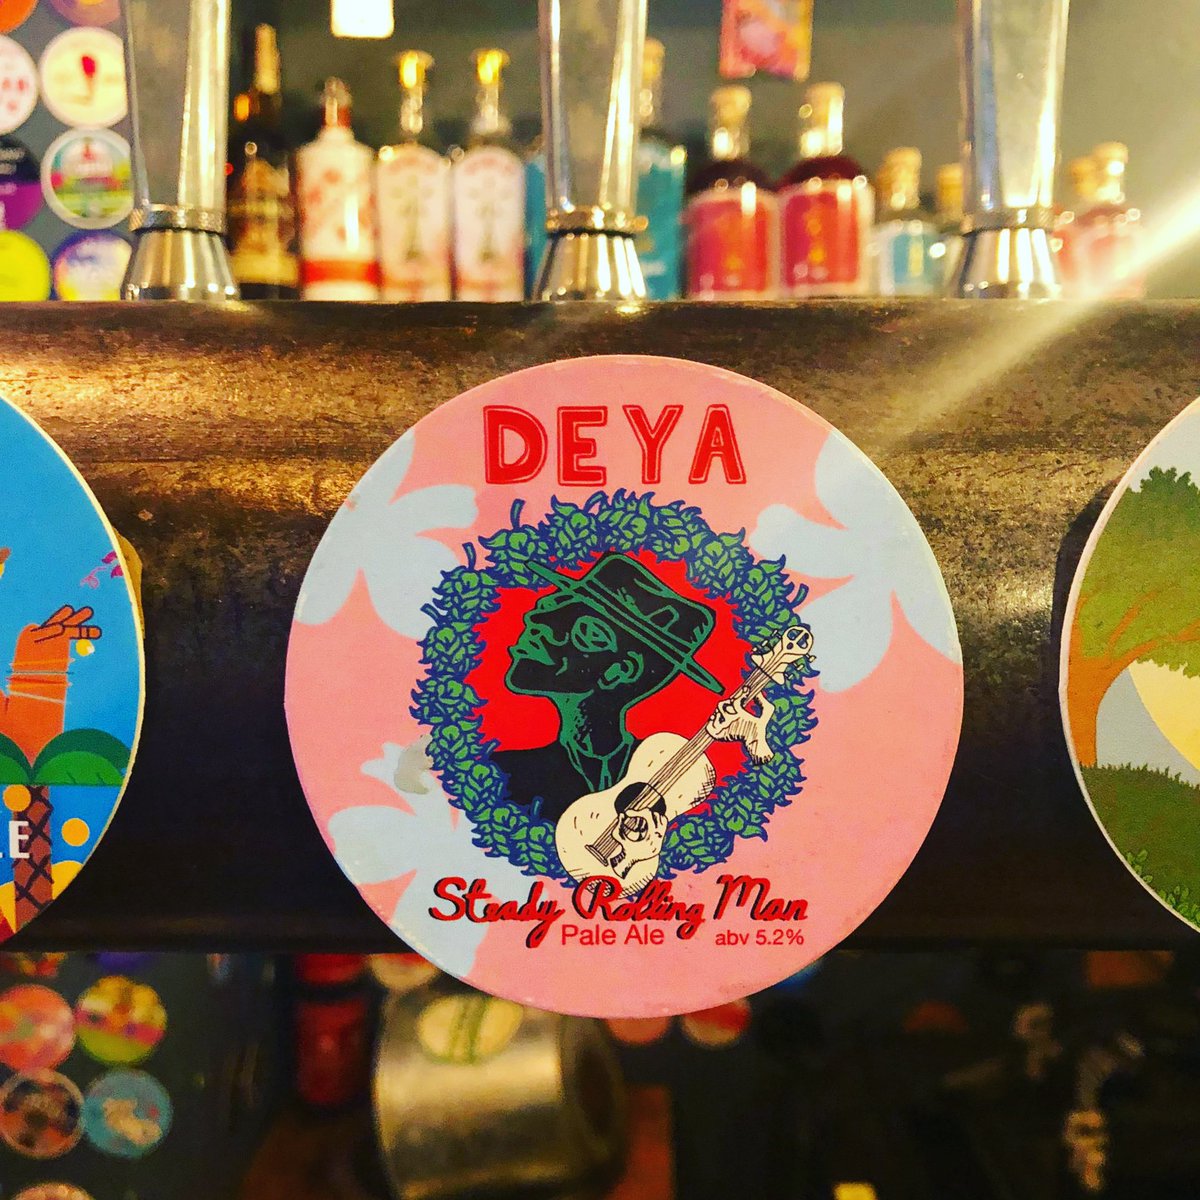 Freshly tapped #Deya just in time for the weekend ;-) Cheers! #CraftAndCourage THE PLACE FOR #CraftBeer AND #CraftGin #CrystalPalace #WestowHill #beers #ShopLocal #SteadyRollingMan #SE19